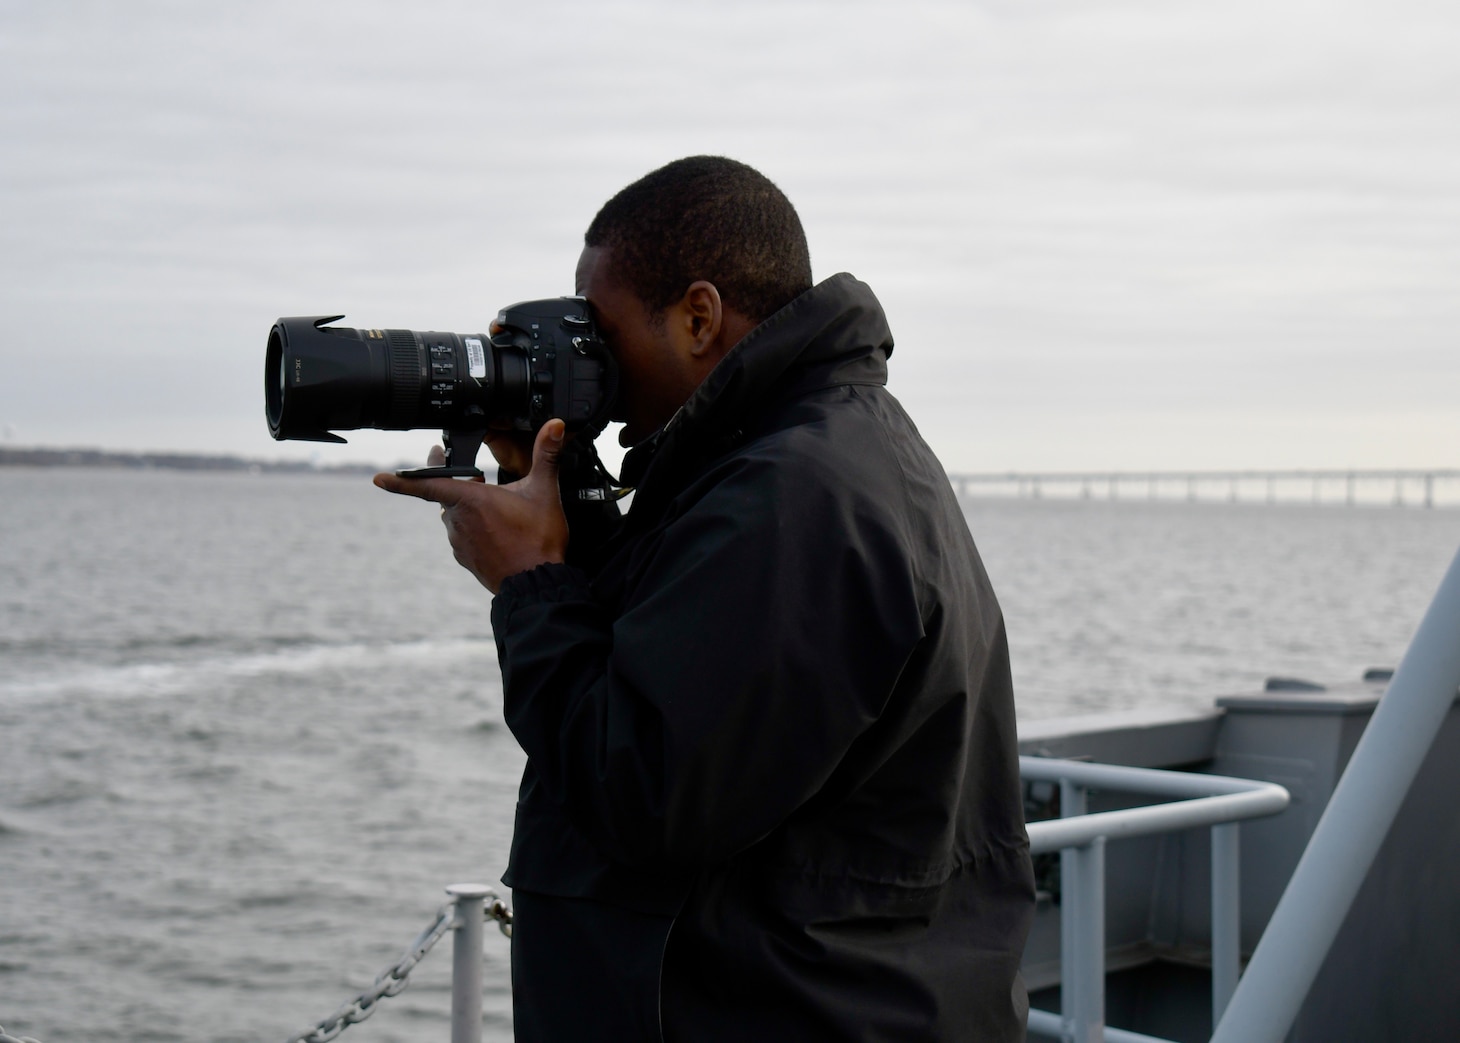 ANNAPOLIS, Maryland (March 26, 2024) - Mass Communication Specialist 1st Class Lorenzo Burleson of the Navy Reserve Chief of Information Office (NR-CHINFO) unit performs Operational Task Visual Information (OPTASK VI) training aboard a U.S. Naval Academy Yard Patrol craft. OPTASK VI is a no-fail mission designed to capture and document unsafe, unprofessional, or nefarious activities at sea, on land, and in the air.

The NR-CHINFO Sailors coordinated with the Naval Academy and Navy Reserve Maritime Expeditionary Security Squadron EIGHT as part of Train the Force efforts to prepare them for mobilization and war fighting assignments.